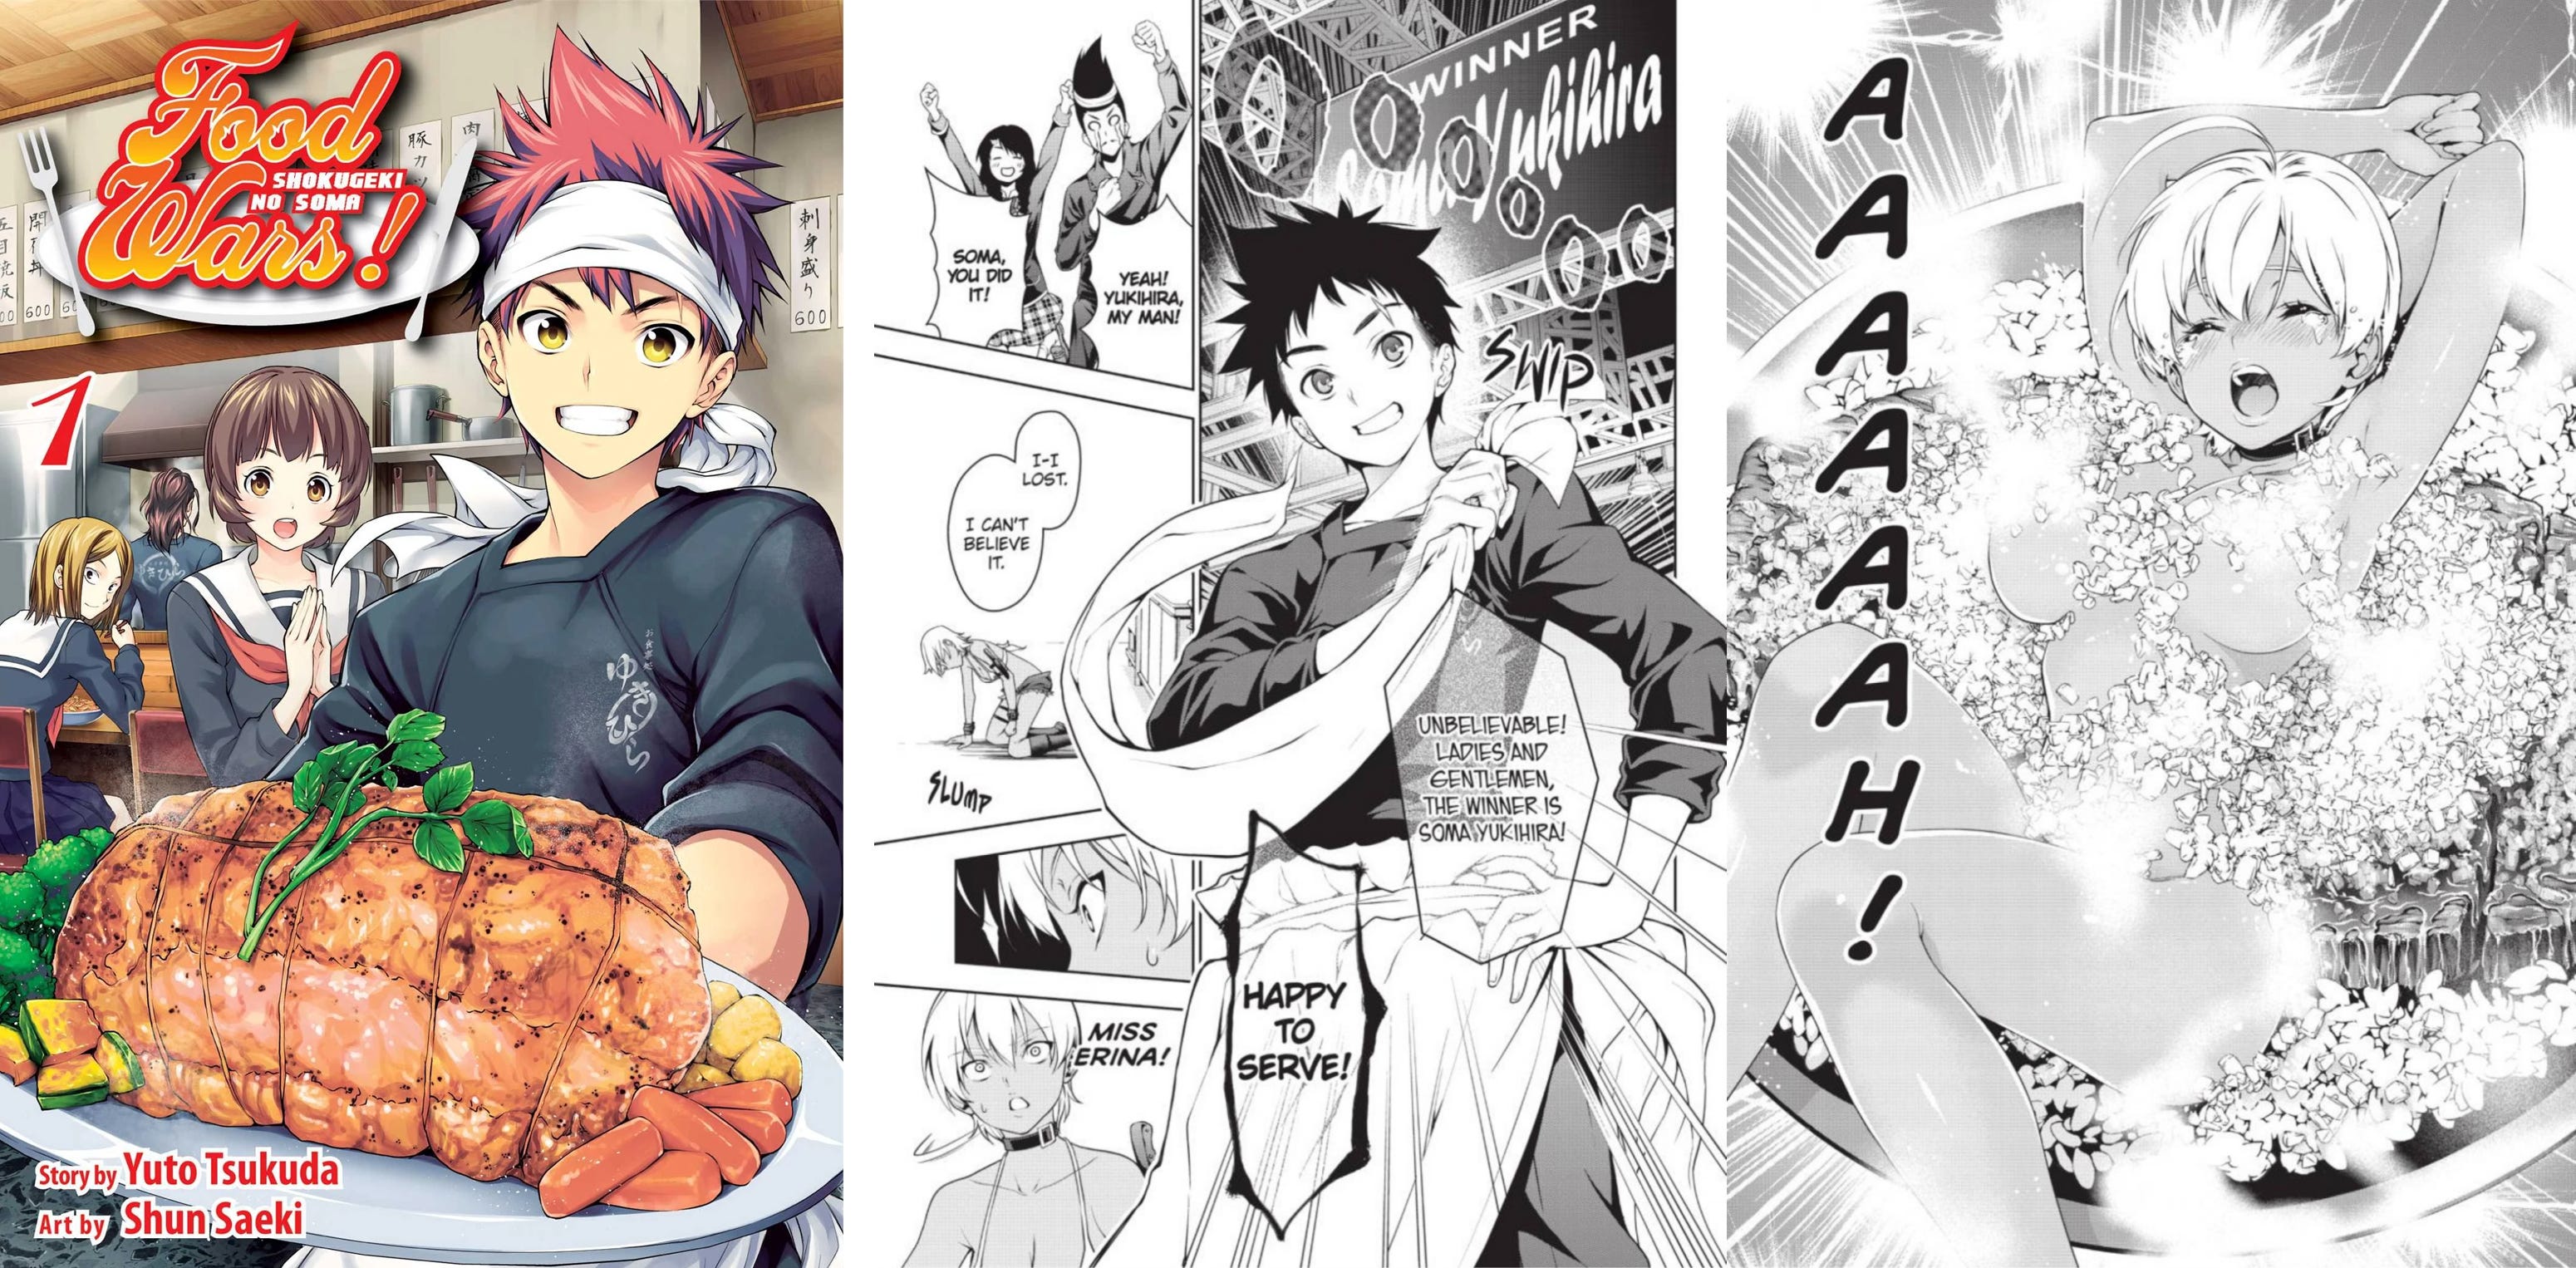 Food Manga: Where Culture, Conflict And Cooking All Collide : The